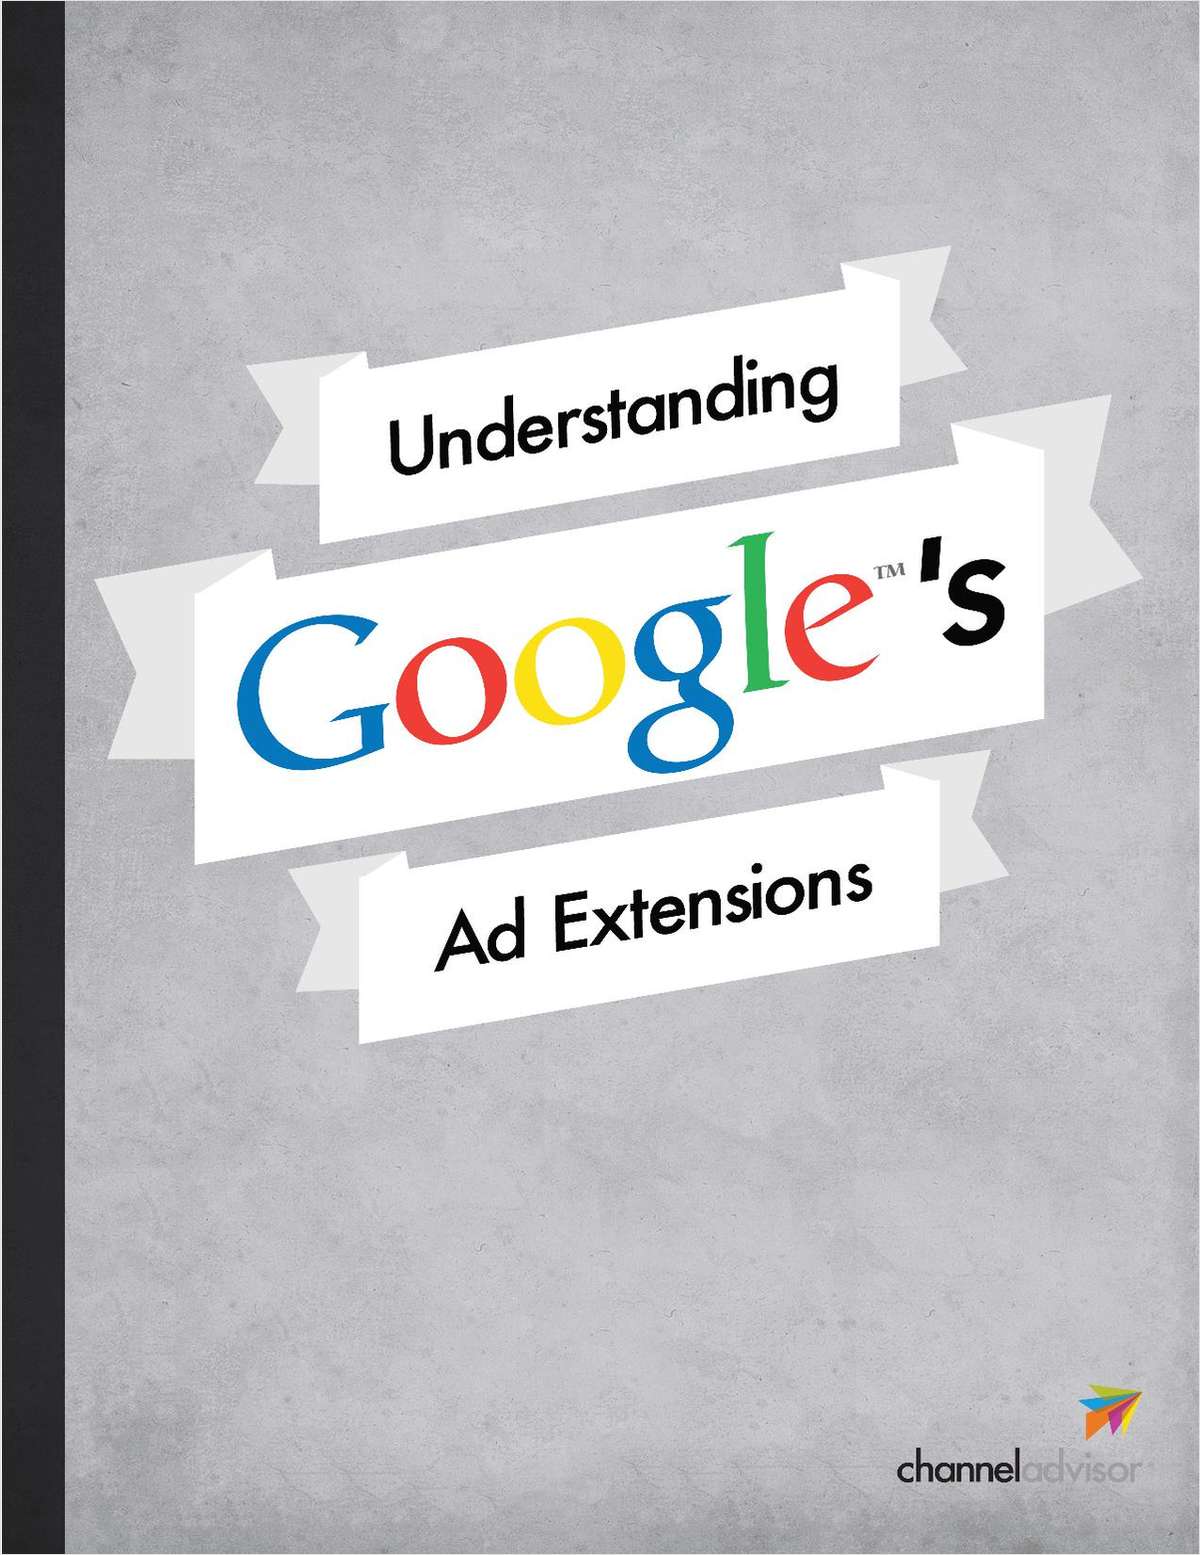 Master Google's Ad Extensions